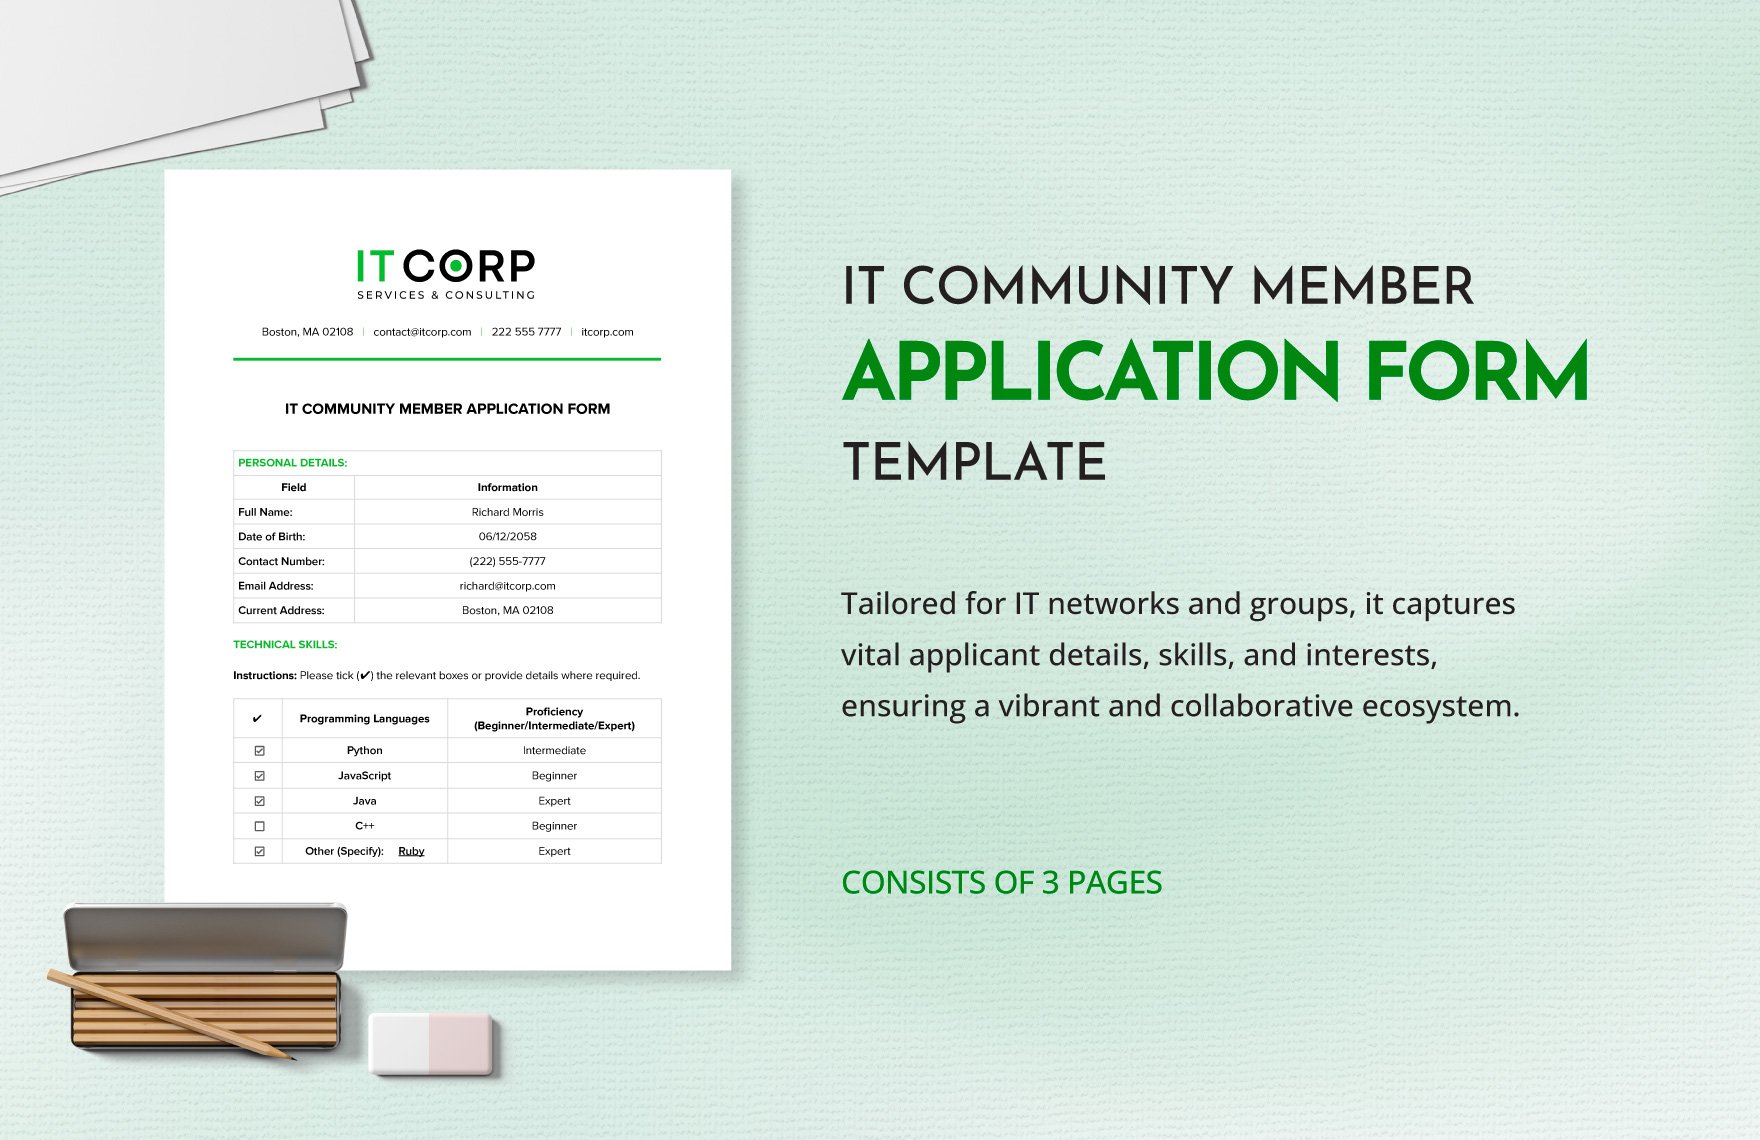 IT Community Member Application Form Template